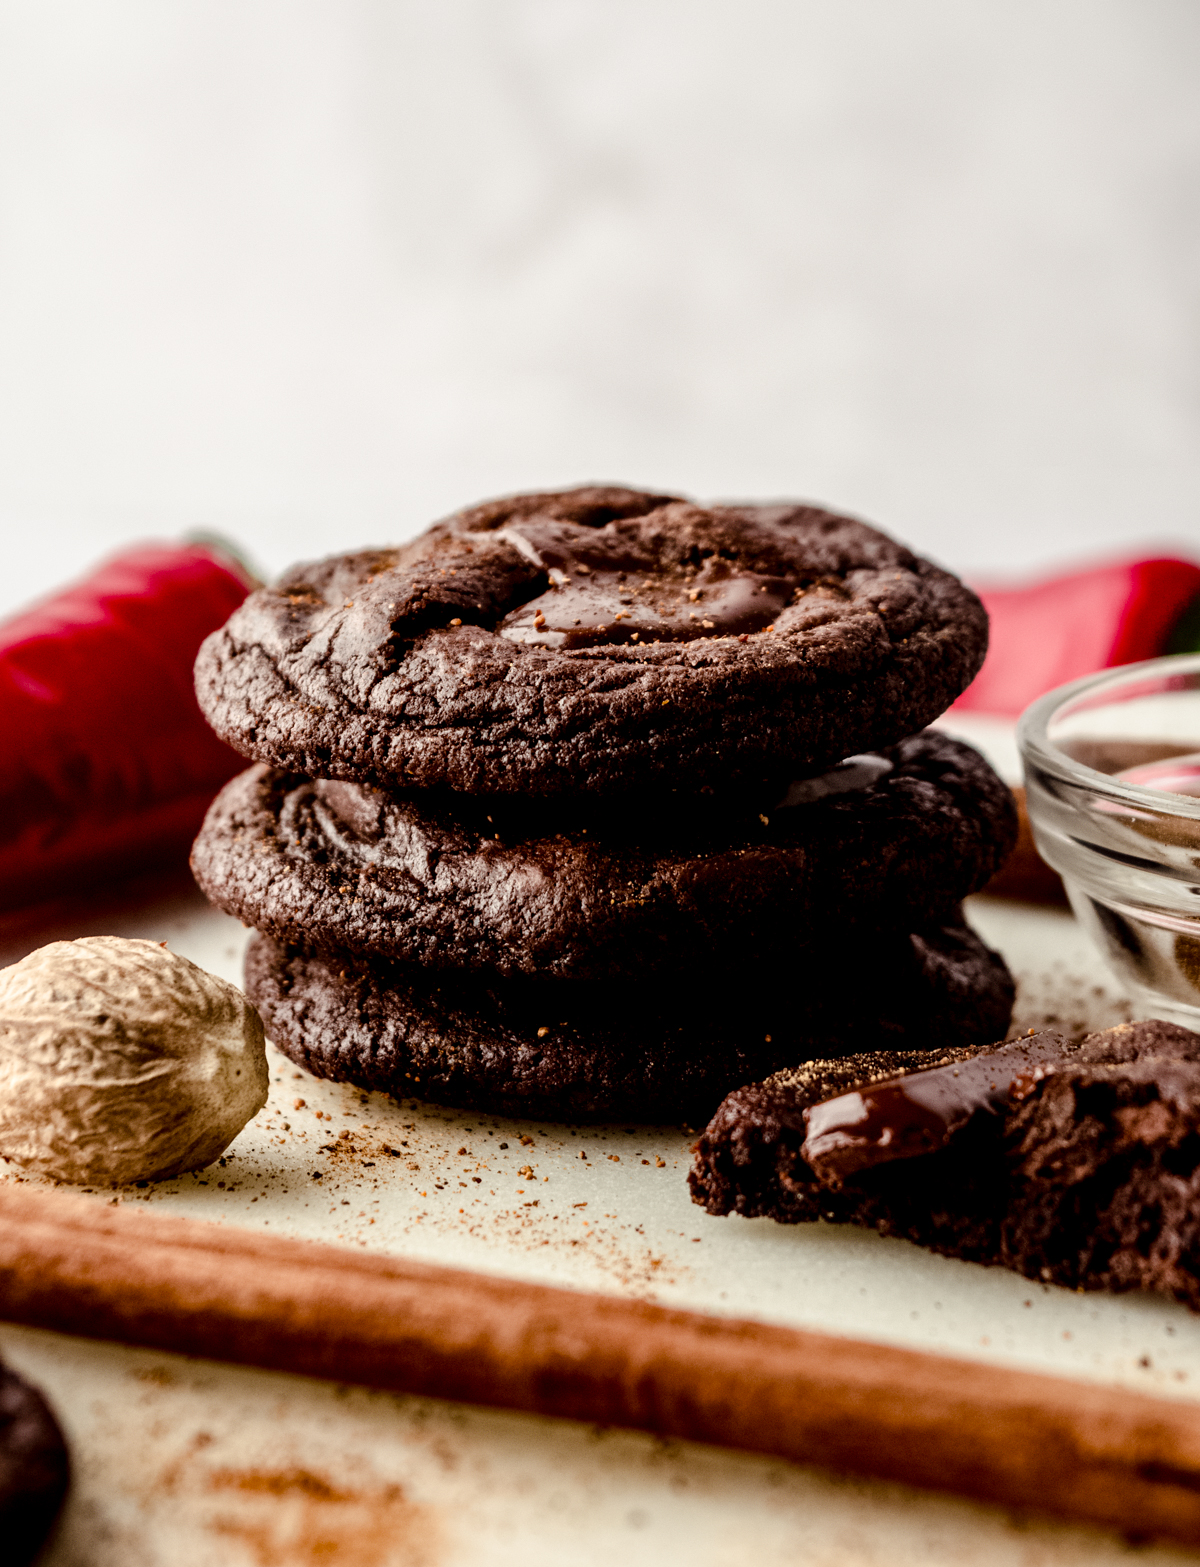 A stack of chocolate cayenne cookies with chili peppers, nutmeg, and cinnamon sticks around it.